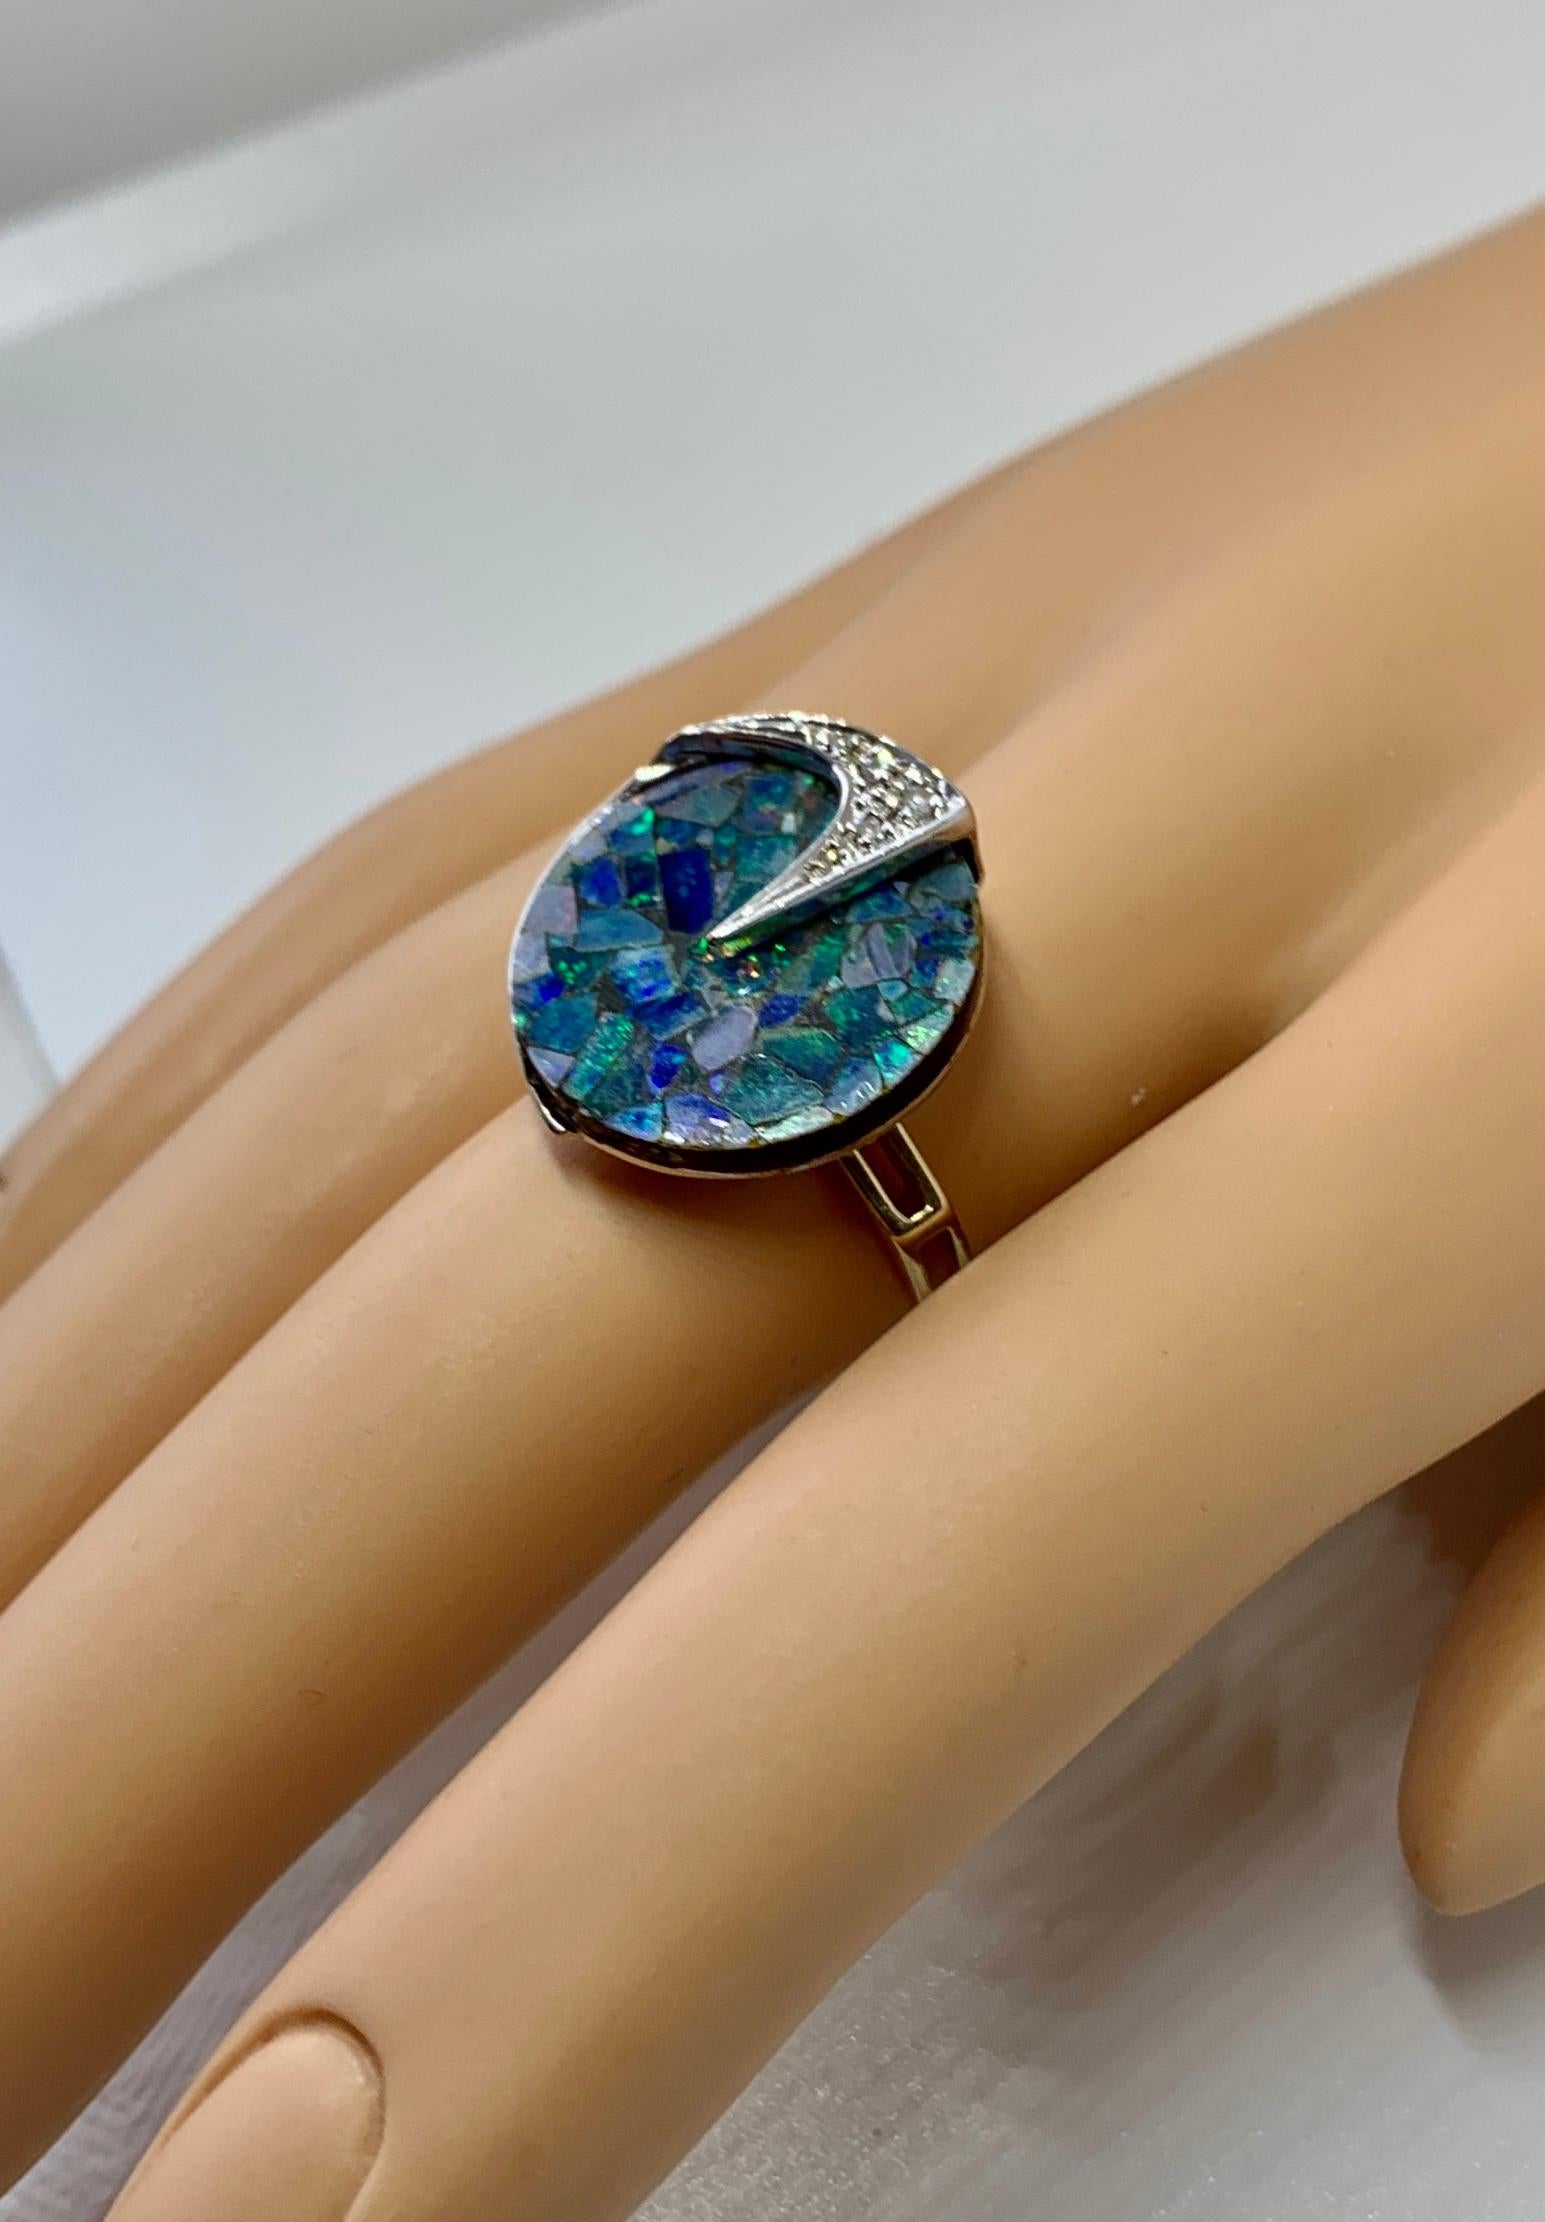 Black Opal Diamond Ring Mid-Century Modern 14 Karat Gold Eames Era Retro In Excellent Condition For Sale In New York, NY